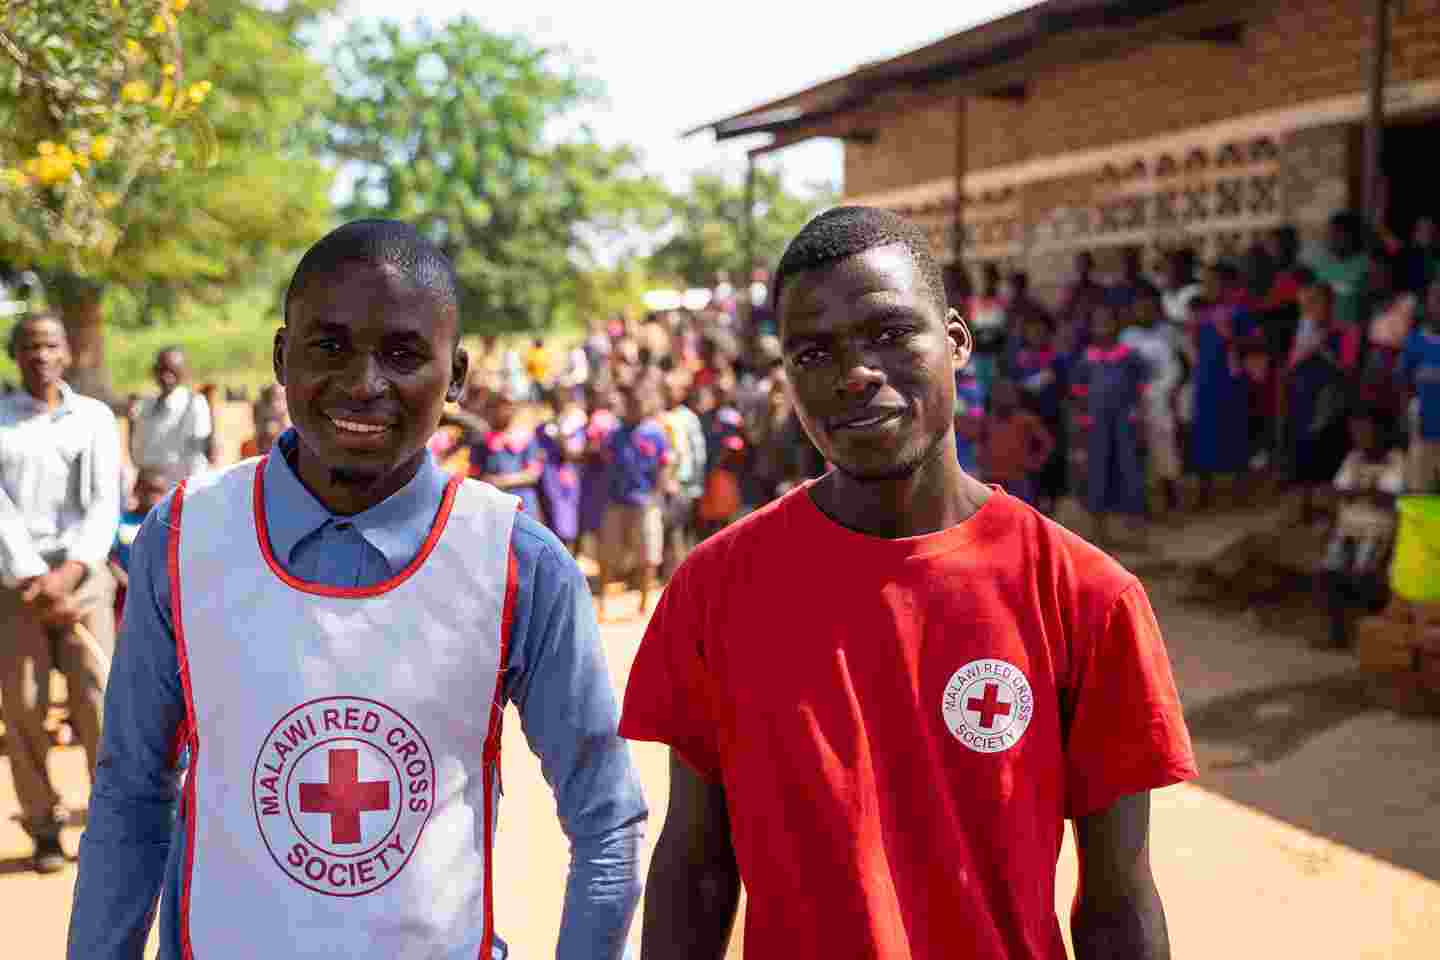 A Red Cross employee and a volunteer.